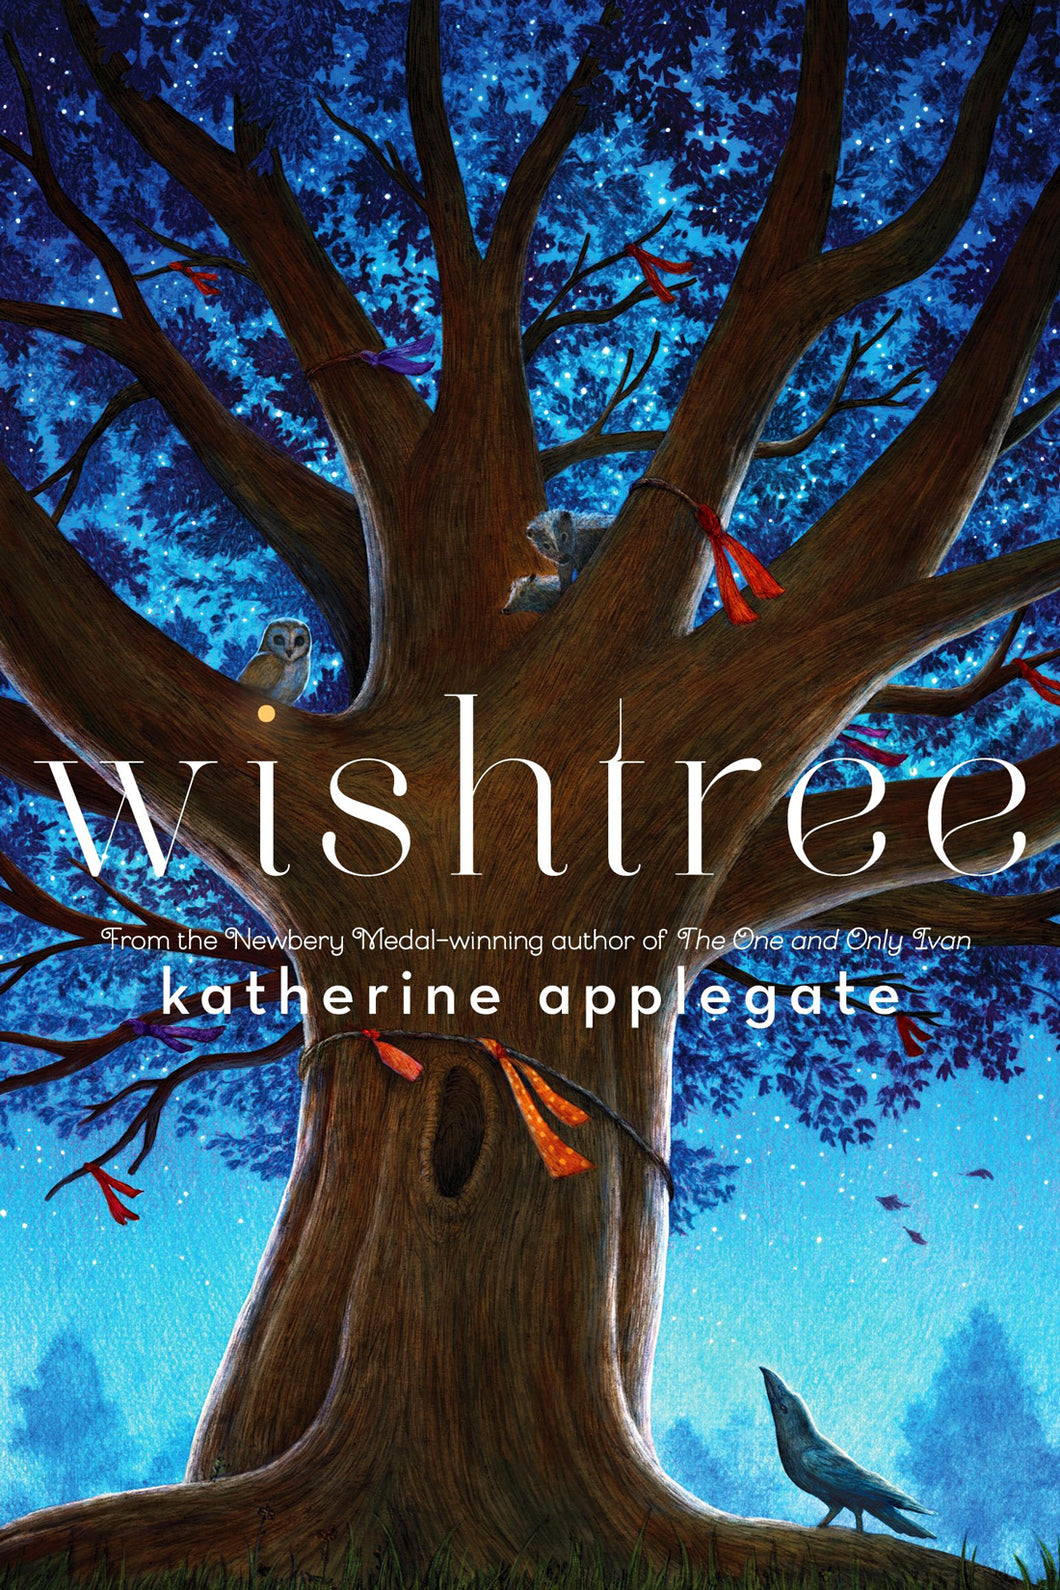 Wishtree by Katherine Applegate / Hardcover or Paperback - NEW BOOK